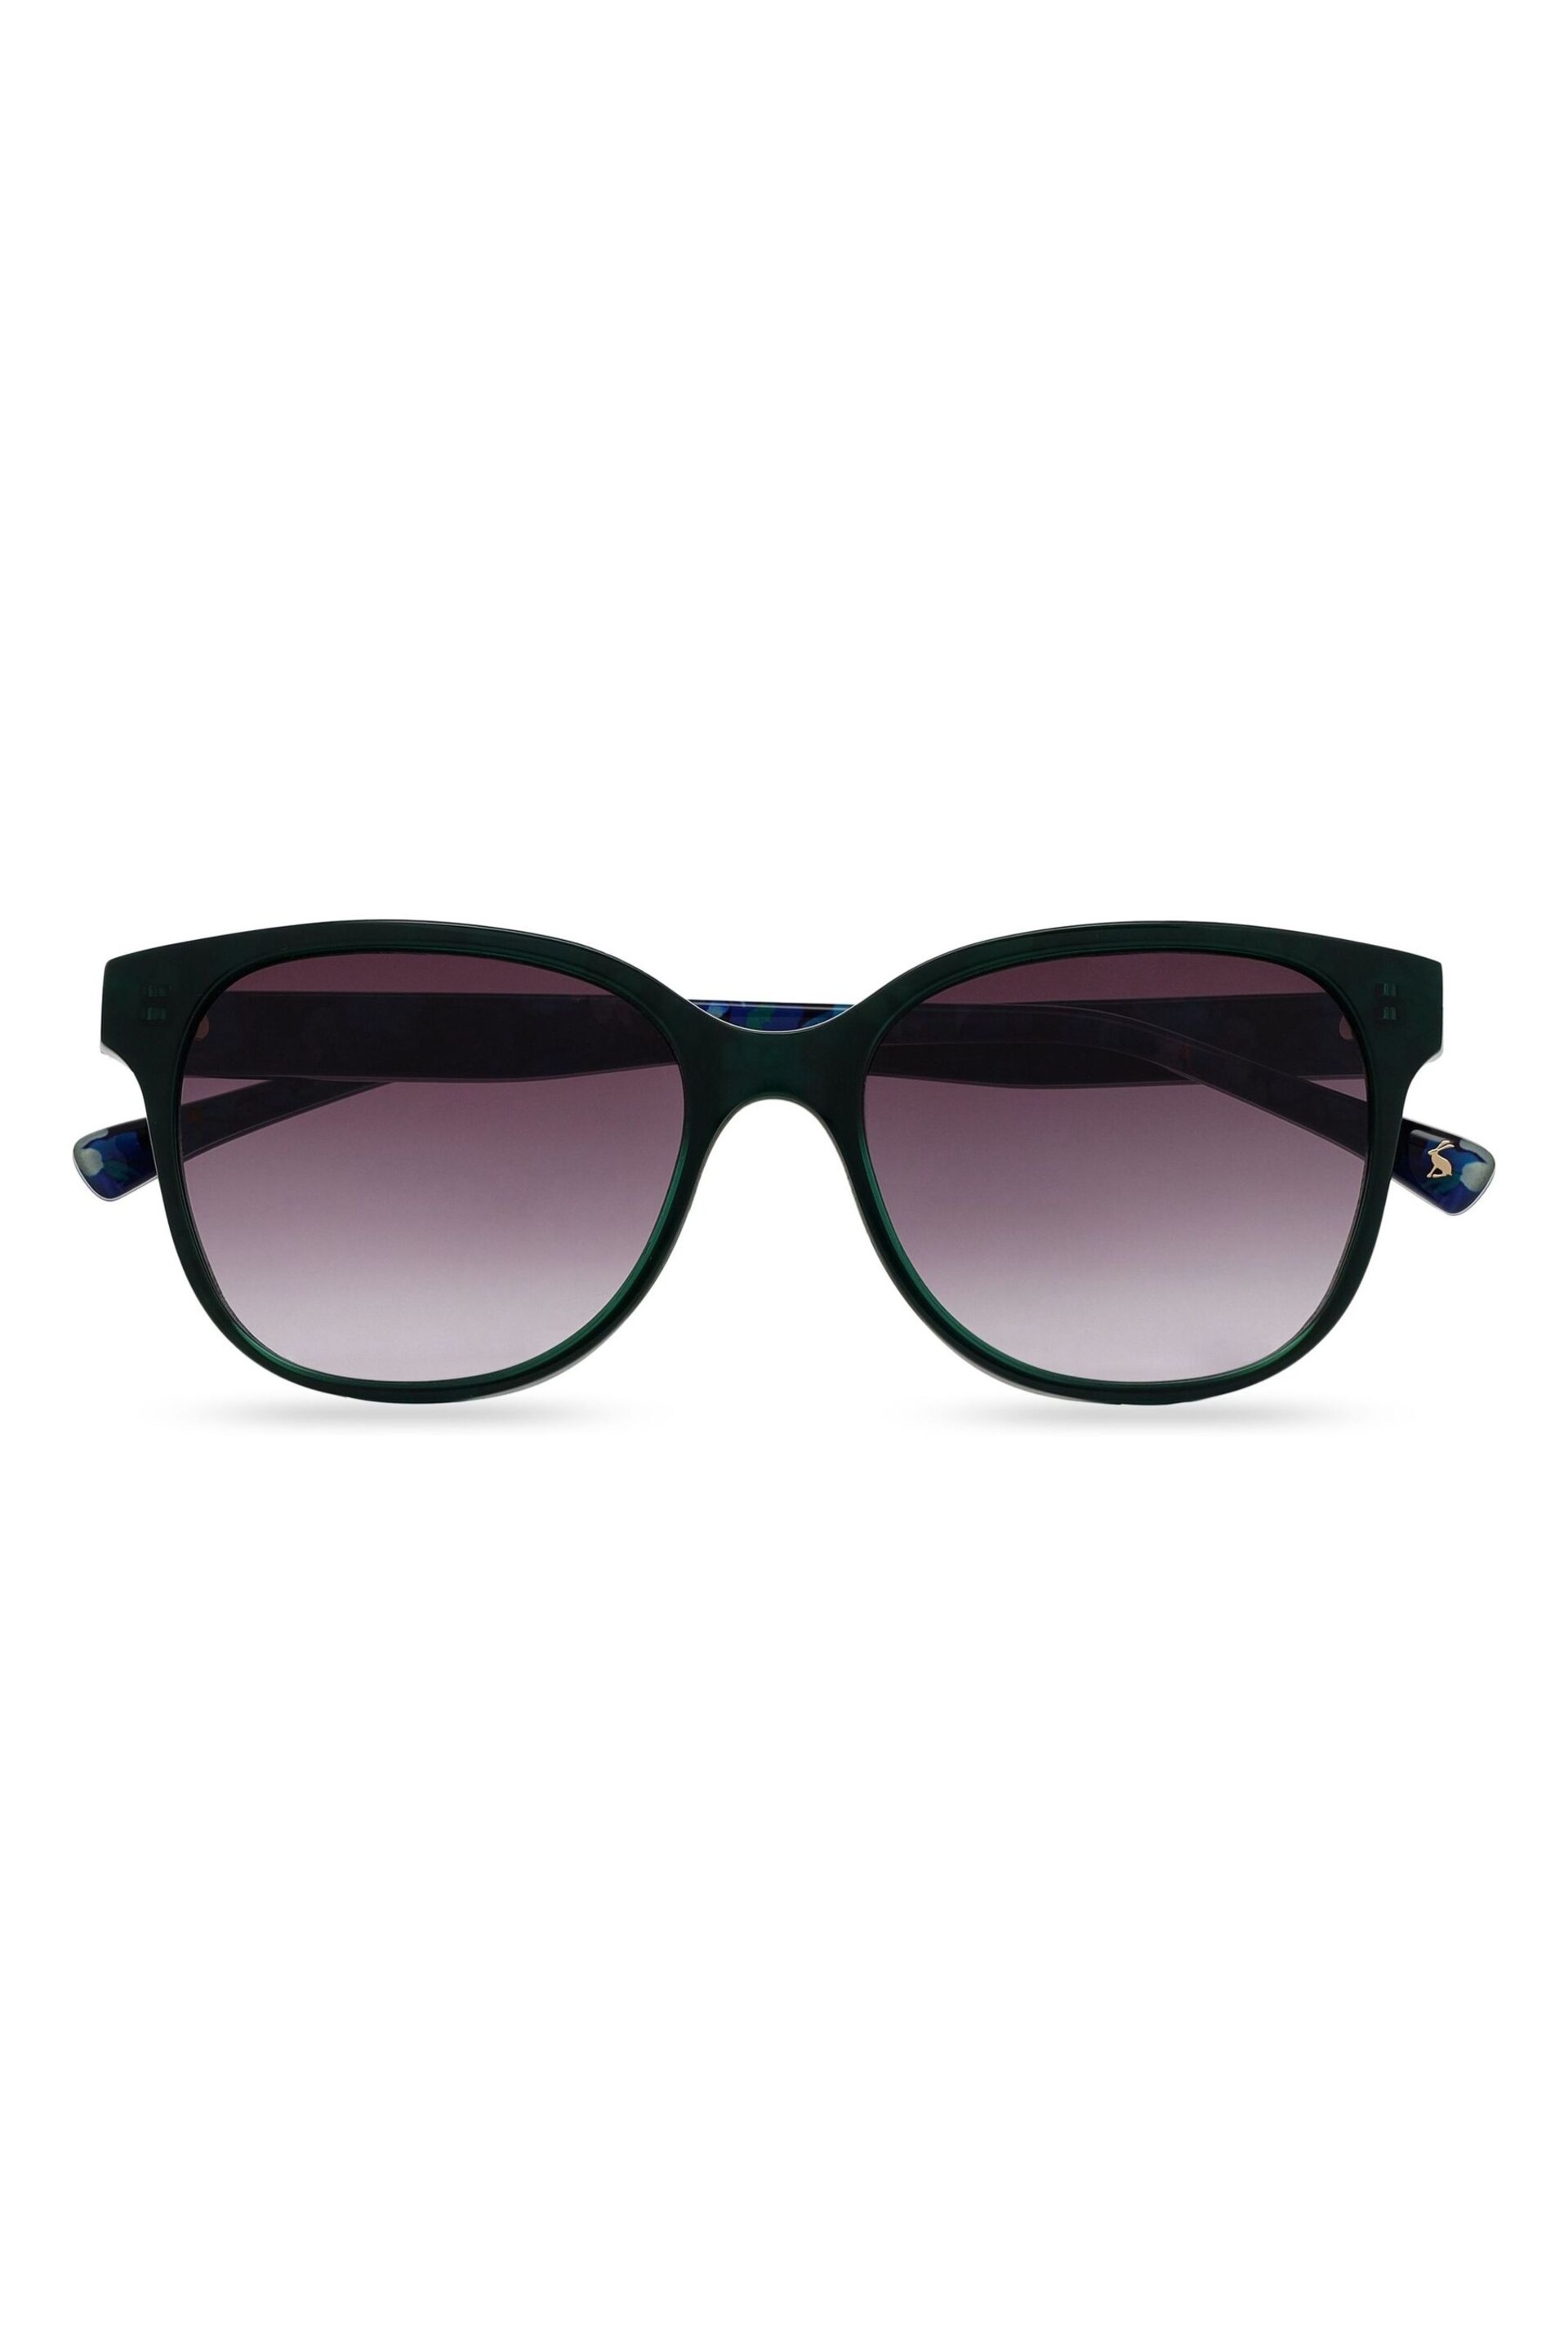 Joules Green Ivy JS7099 Sunglasses - Image 2 of 4